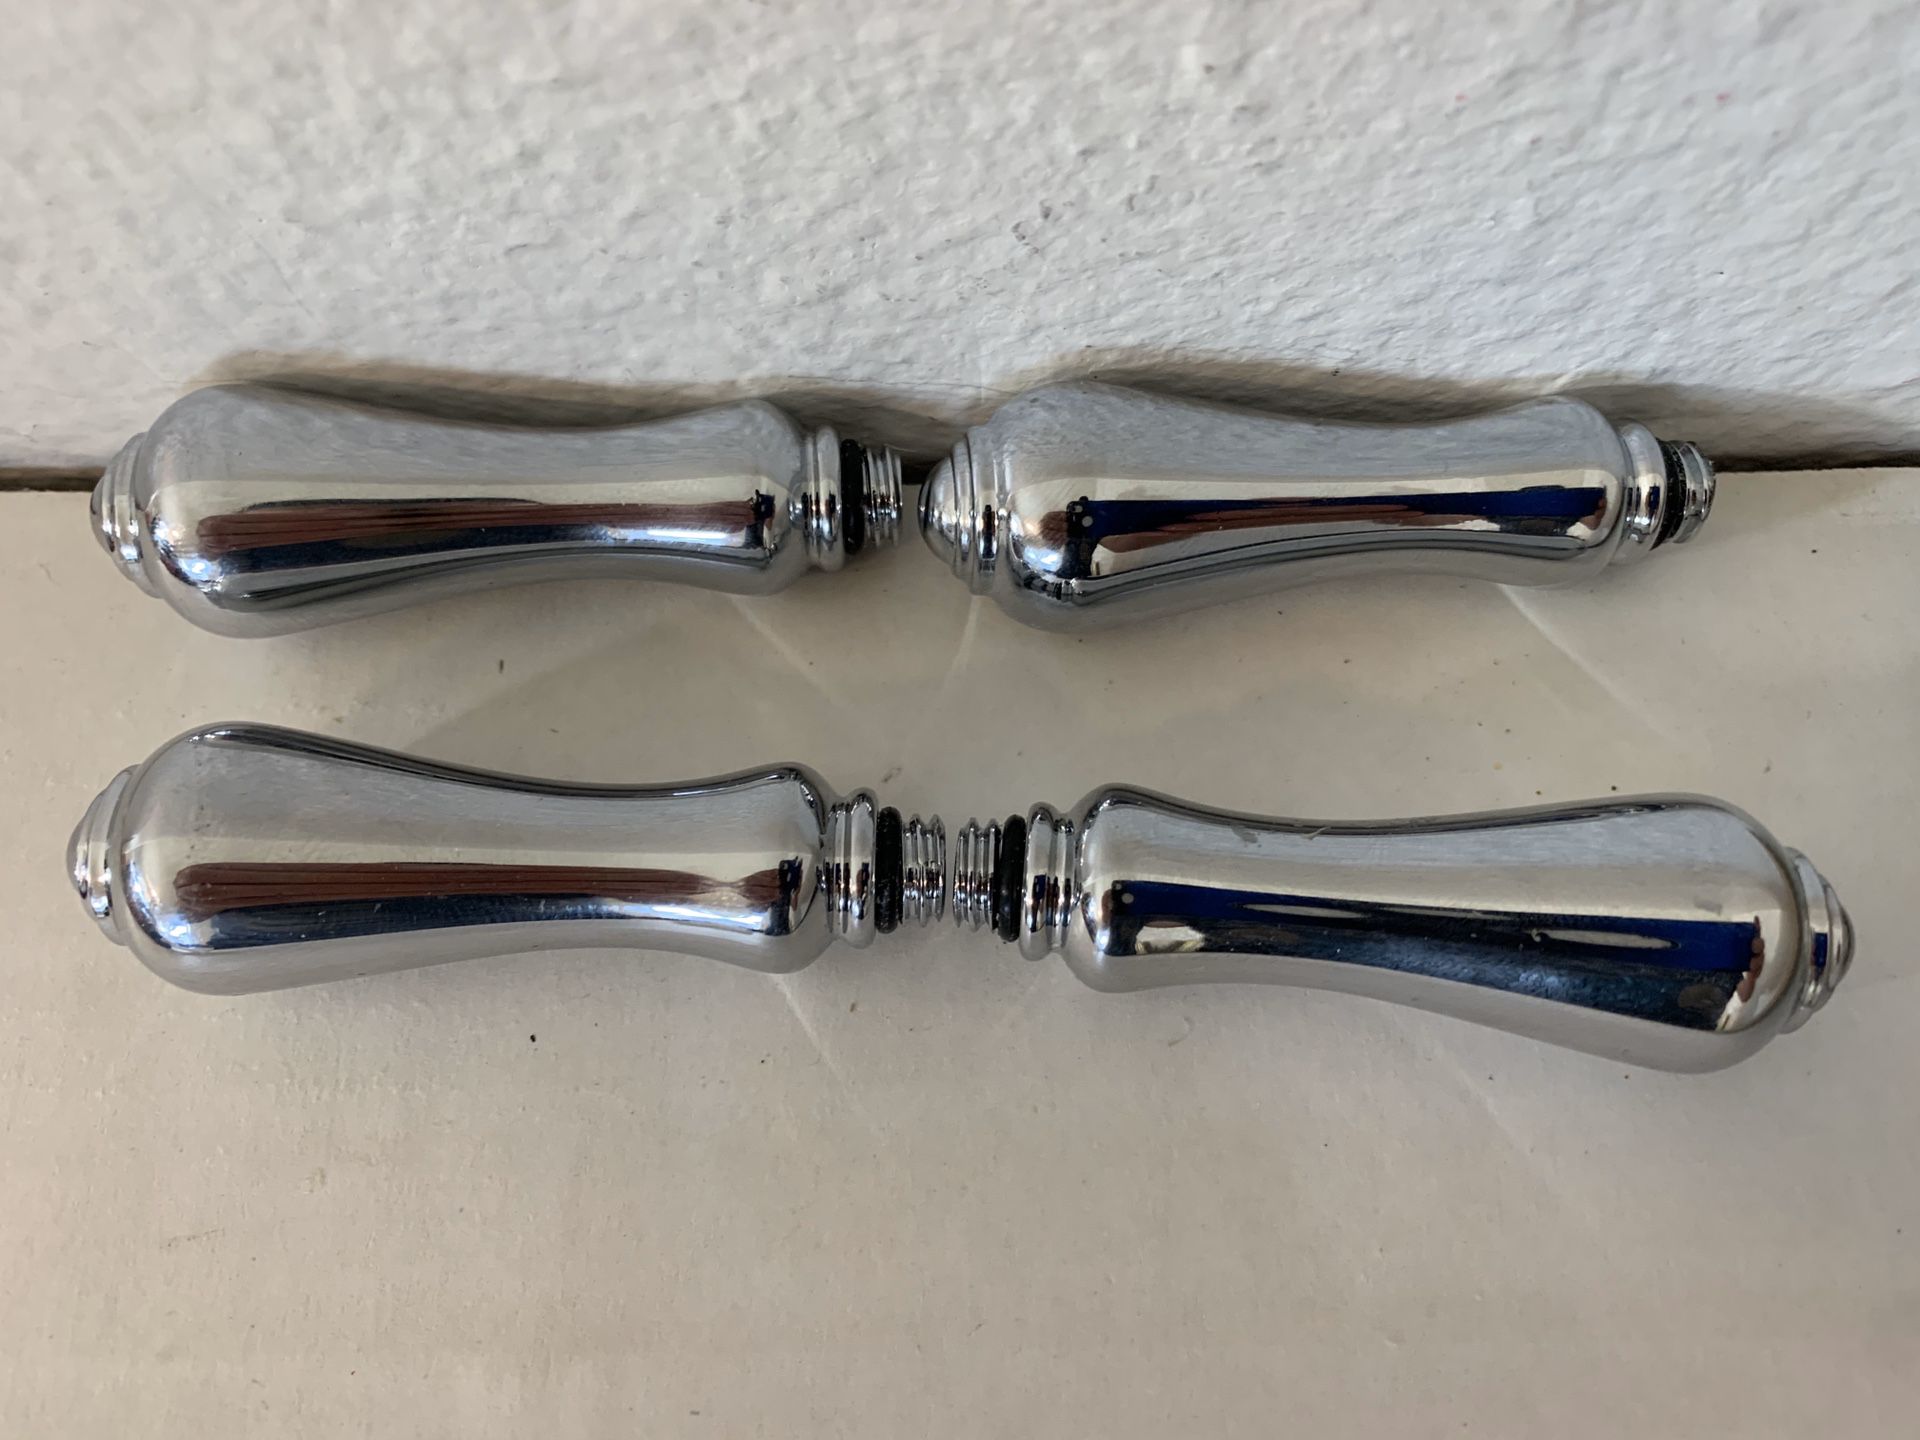 4 Faucet Sink Screw-On Handles 2 1/2 Inch Polished Chrome Metal